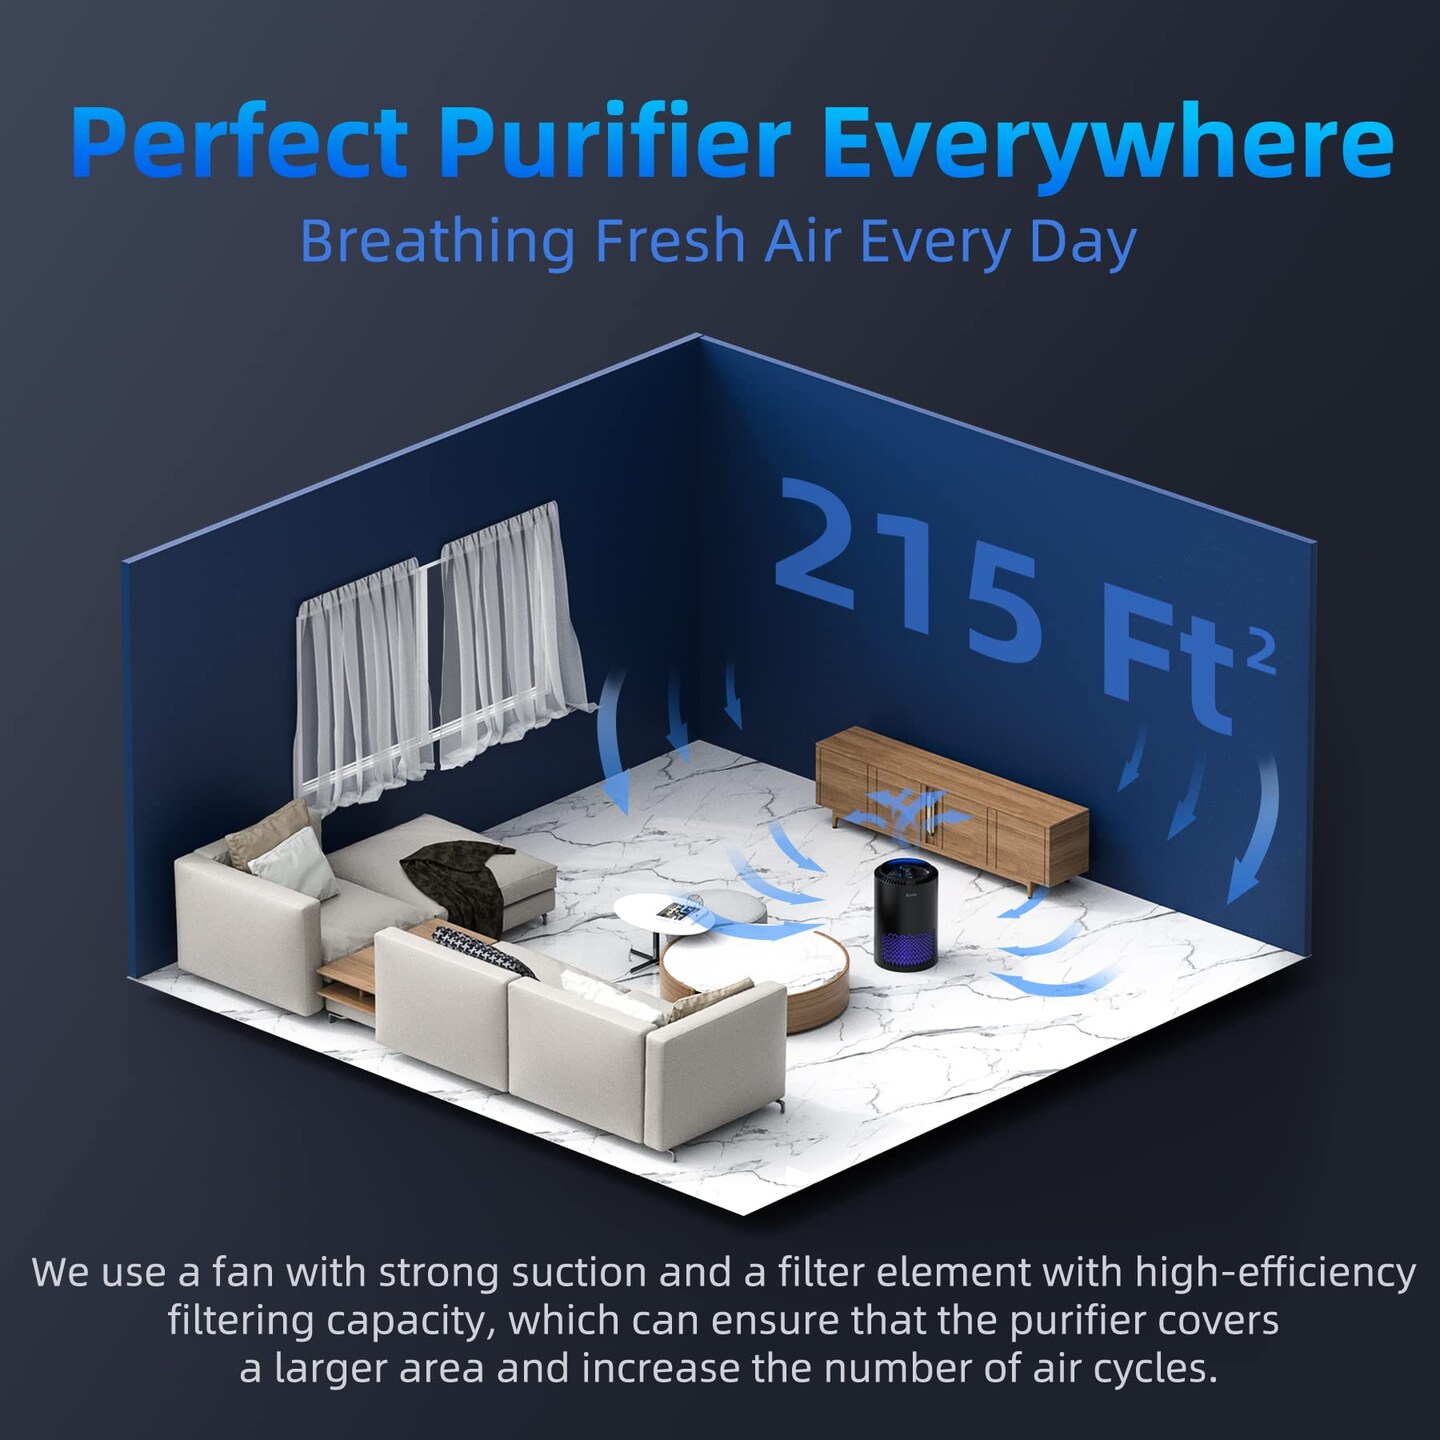 AROEVE Air Purifiers for Home, HEPA Air Purifiers Air Cleaner For Smoke Pollen Dander Hair Smell Portable Air Purifier with Sleep Mode Speed Control For Bedroom Office Living Room, MK01- Black